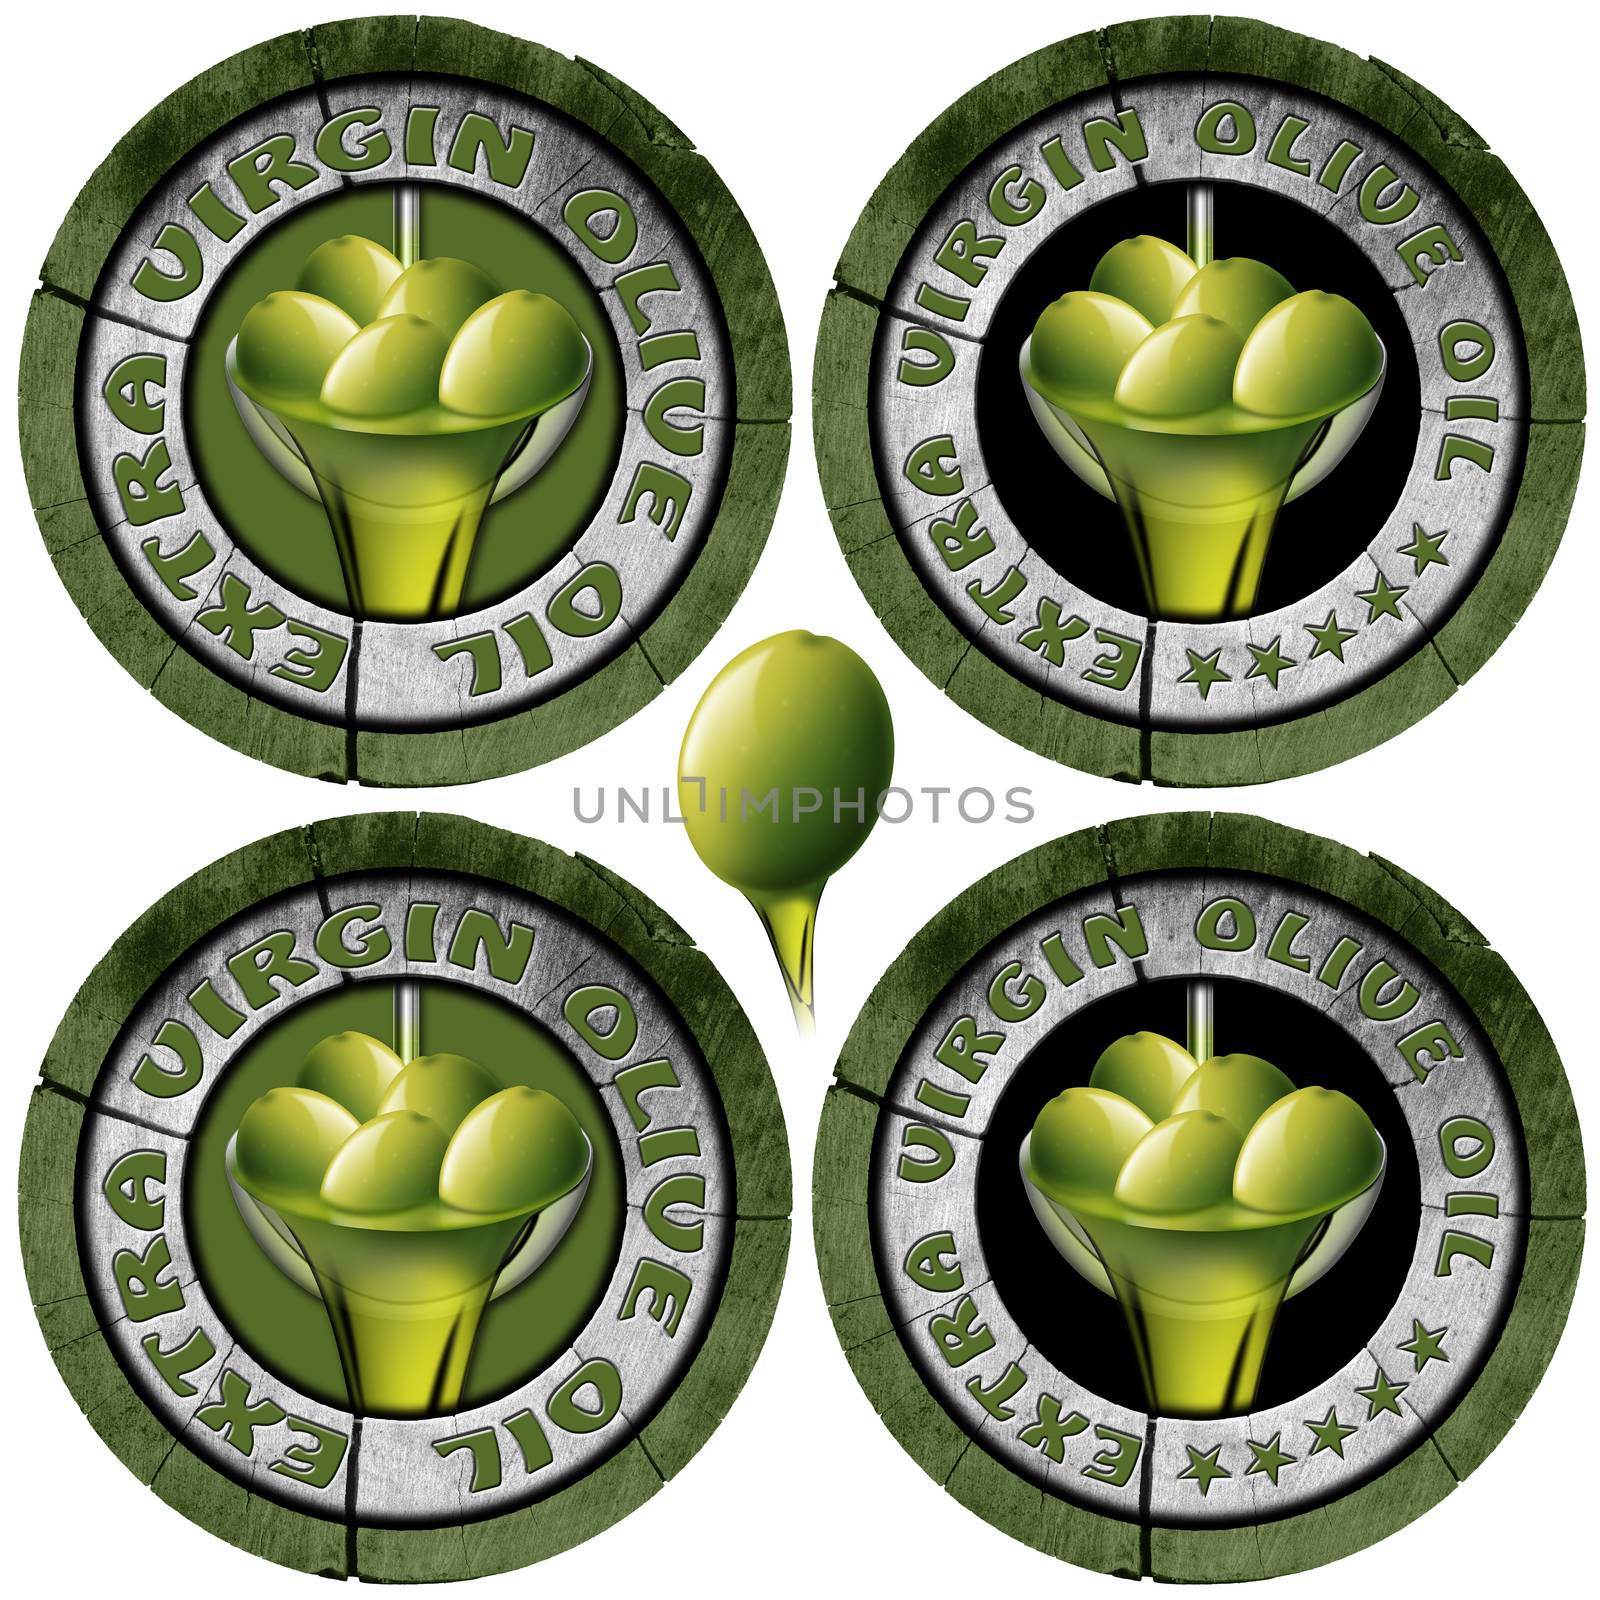 Extra Virgin Olive Oil - Four Icons by catalby